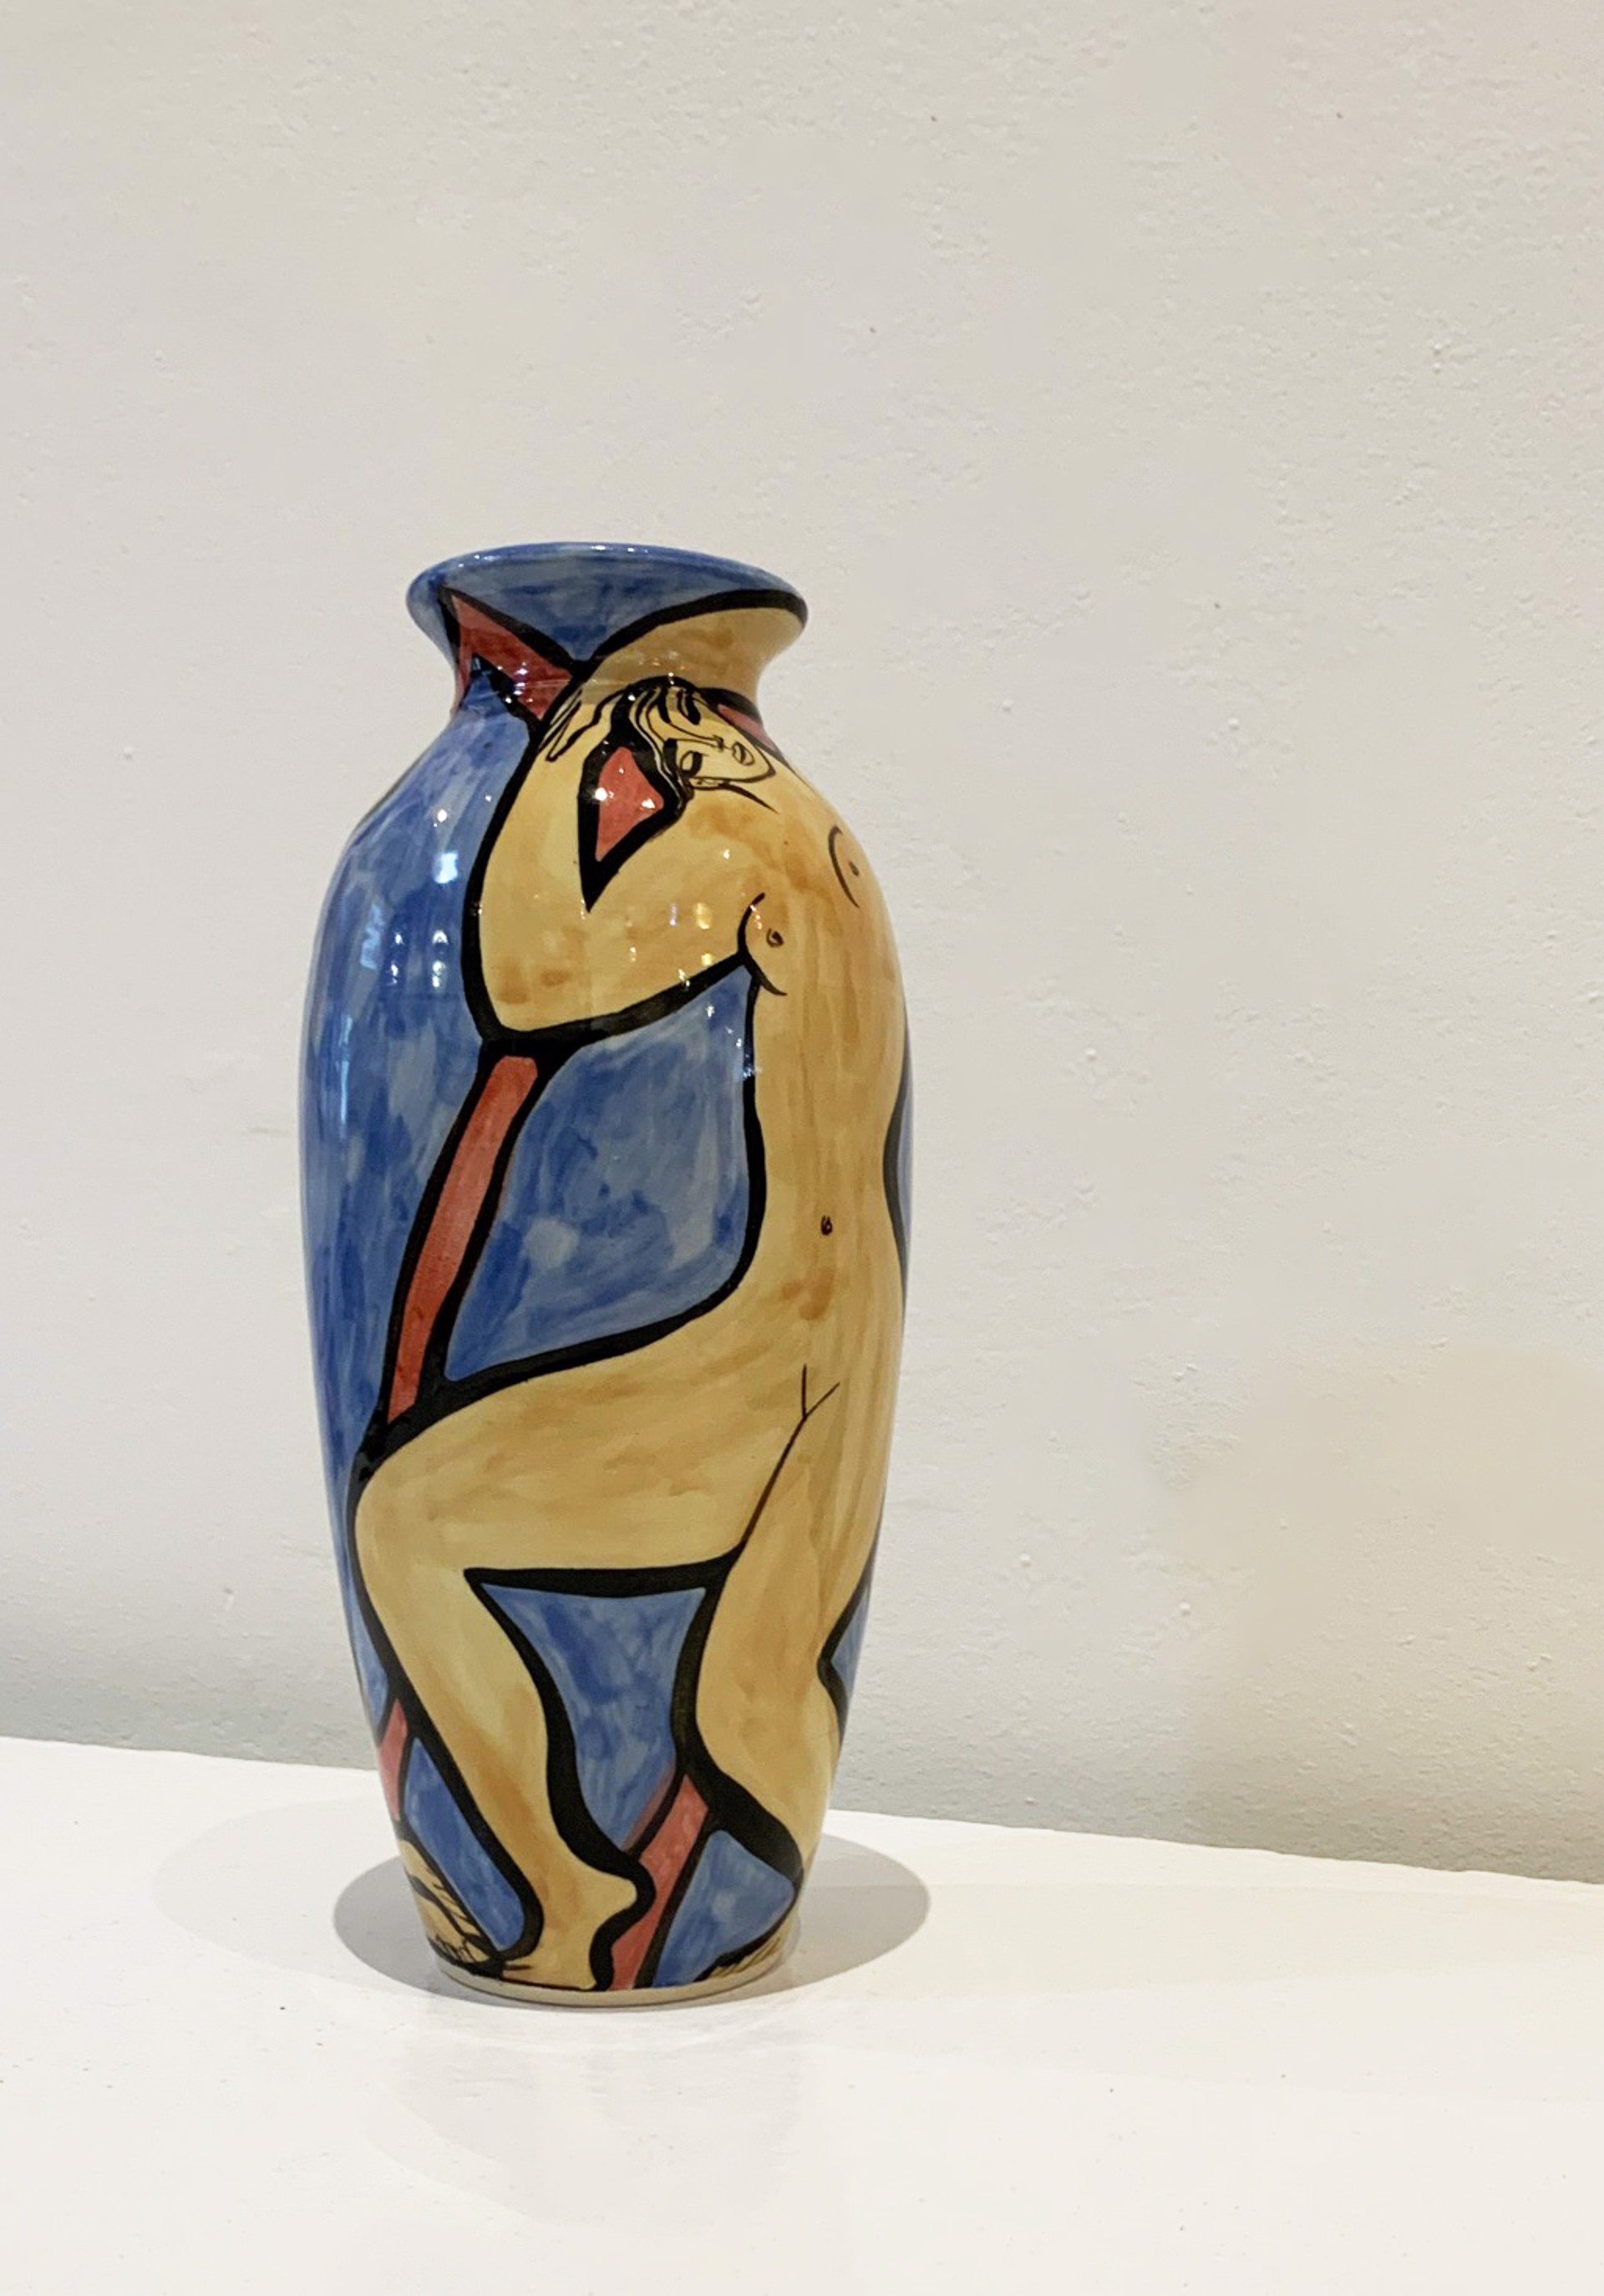 Vase #28 by Ken and Tina Riesterer